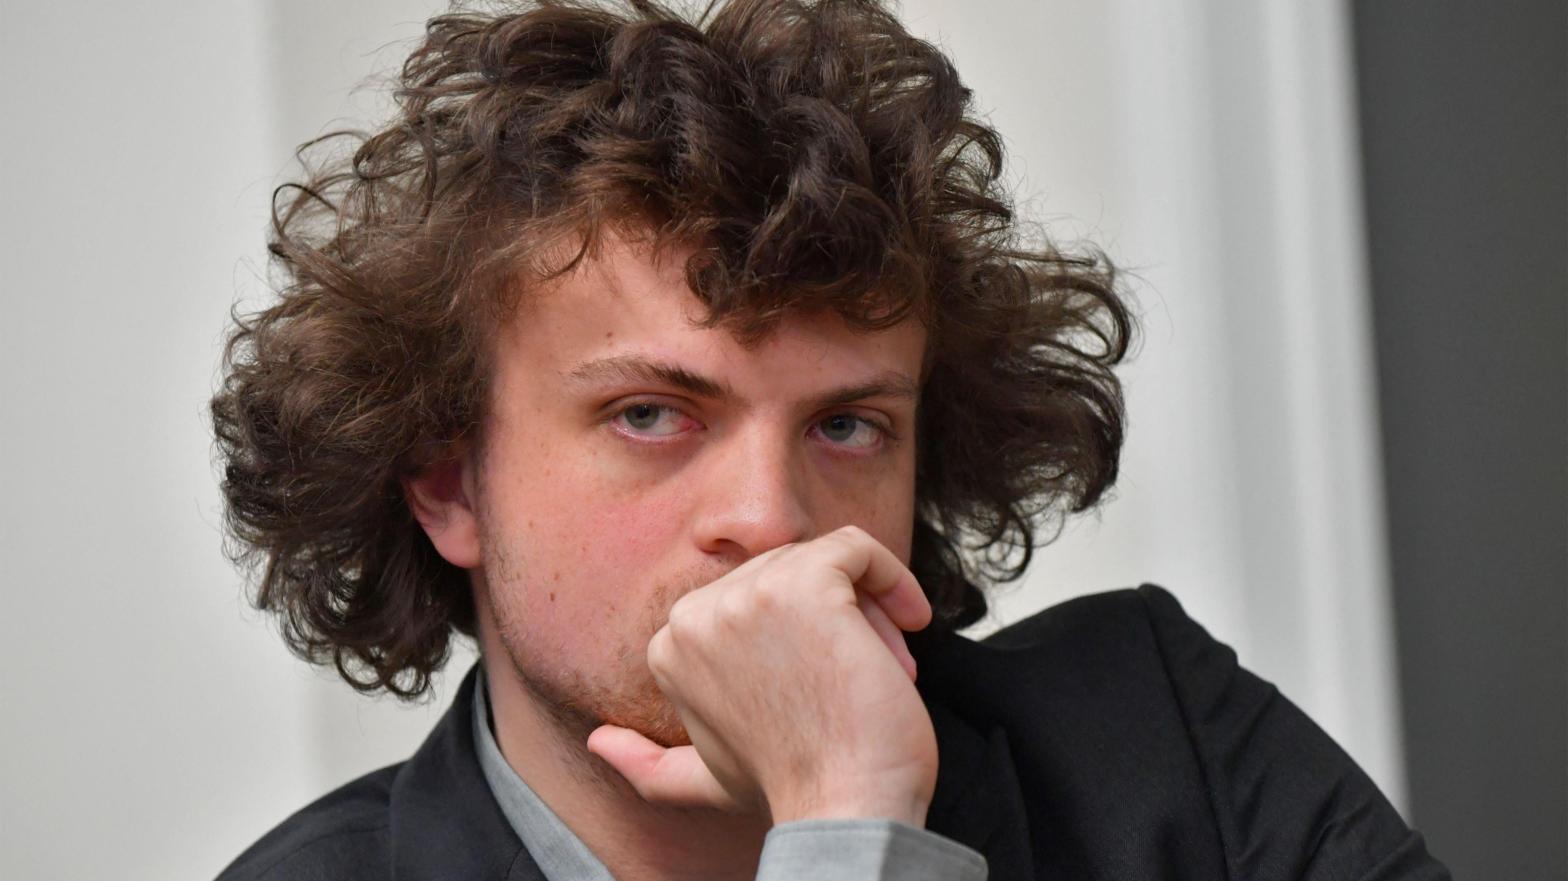 Hans Niemann, a 19-year-old chess master from the U.S., sued two rivals and the biggest online chess site for defamation. (Photo: TIM VIZER/AFP, Getty Images)